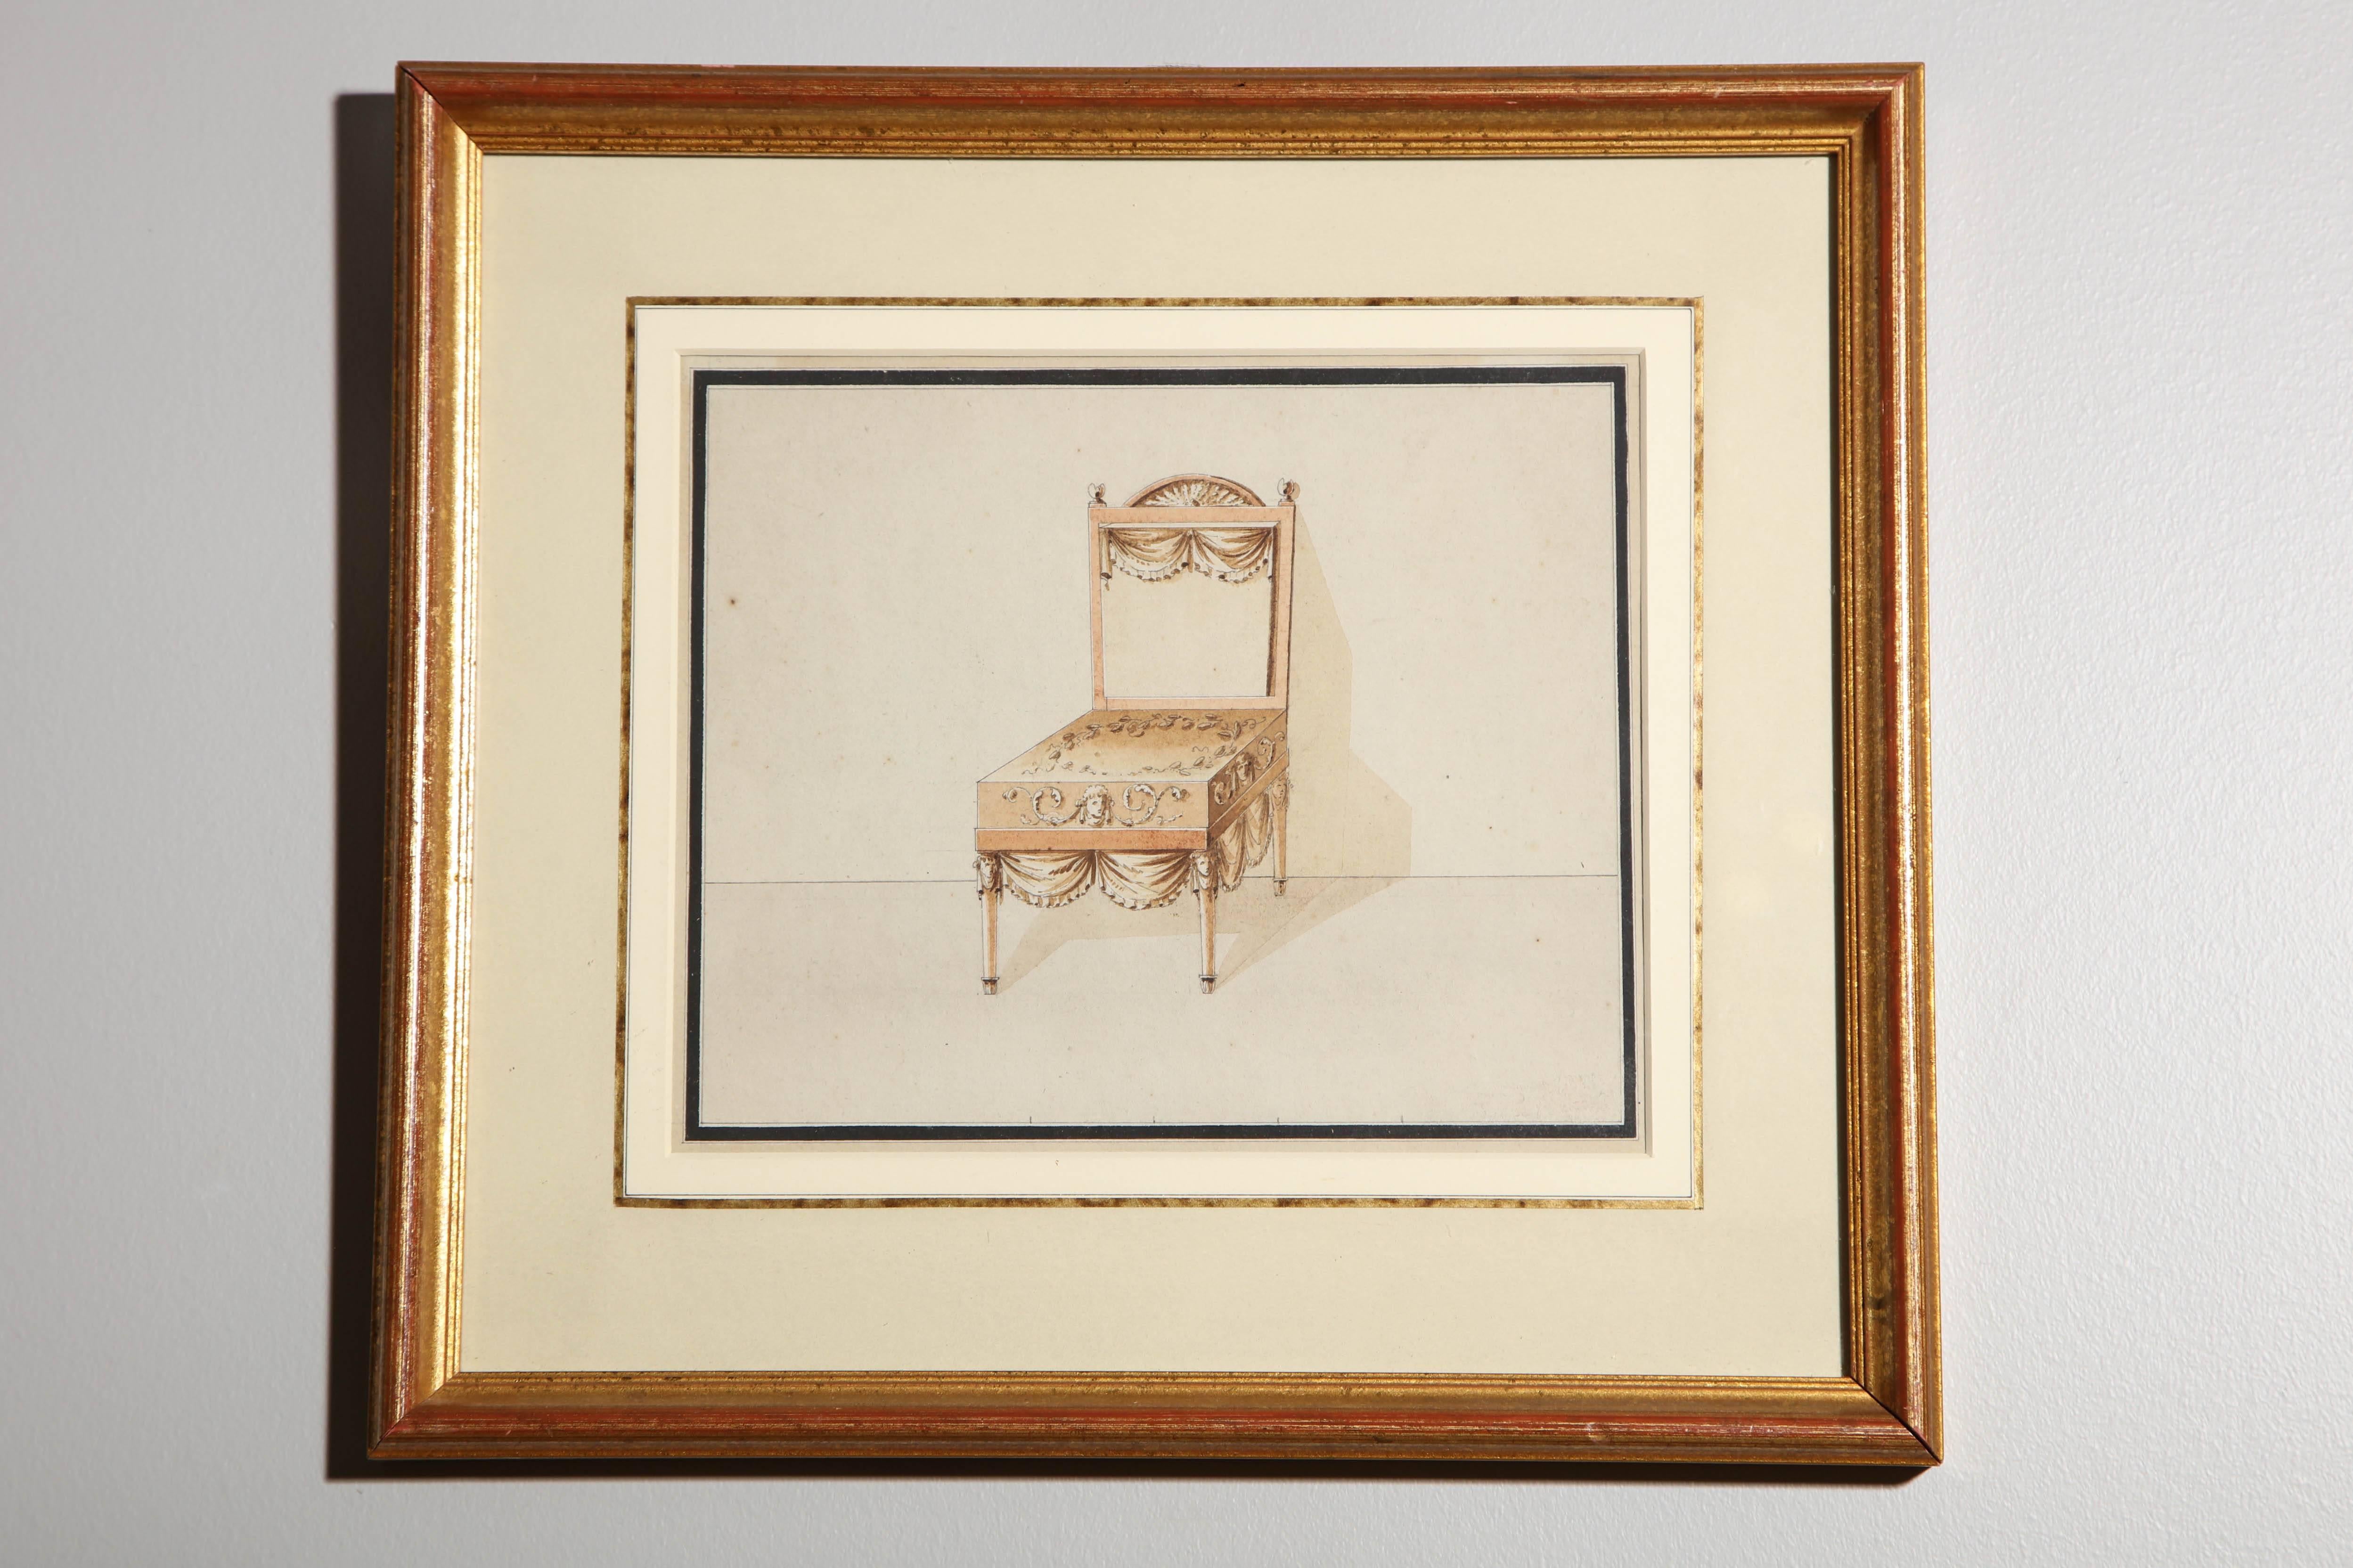 Series of Hand-Painted Drawings of Furniture 4